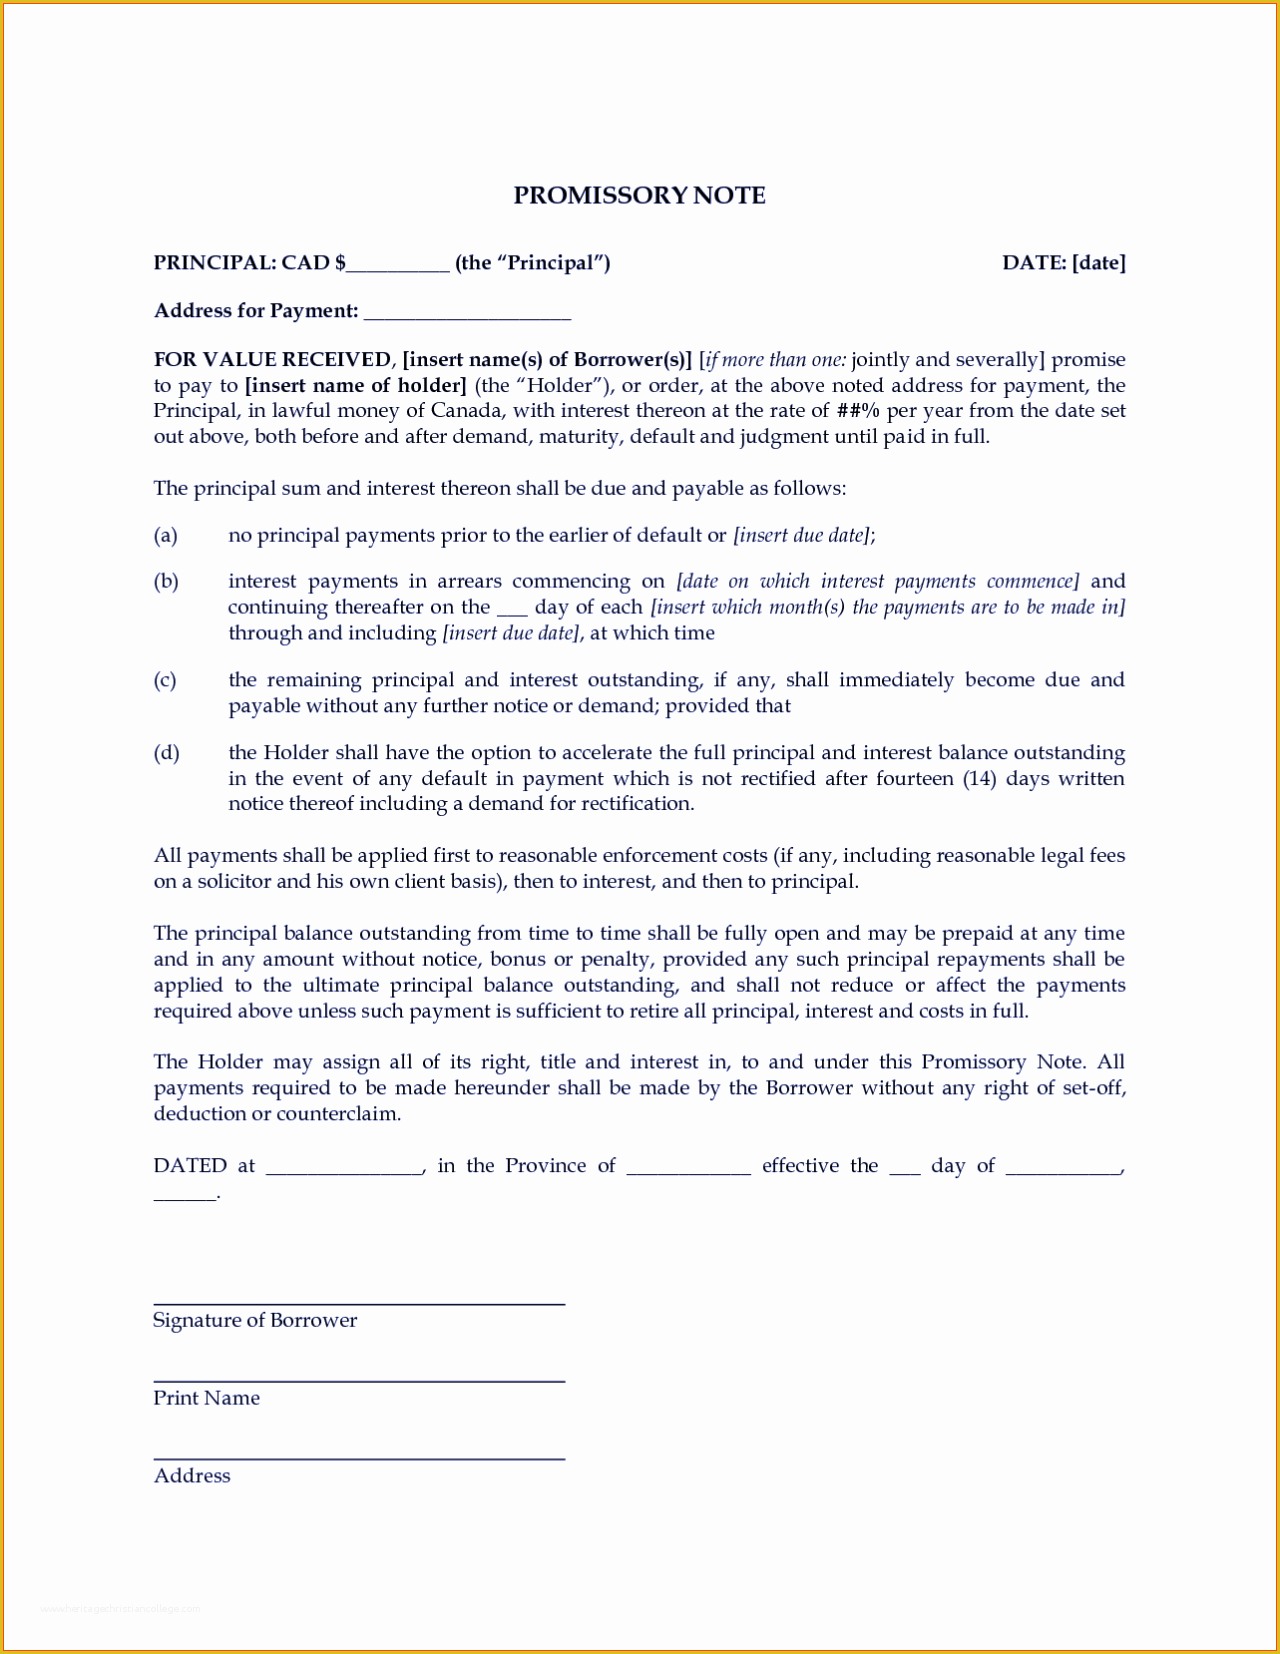 free-promissory-note-template-for-a-vehicle-of-free-promissory-note